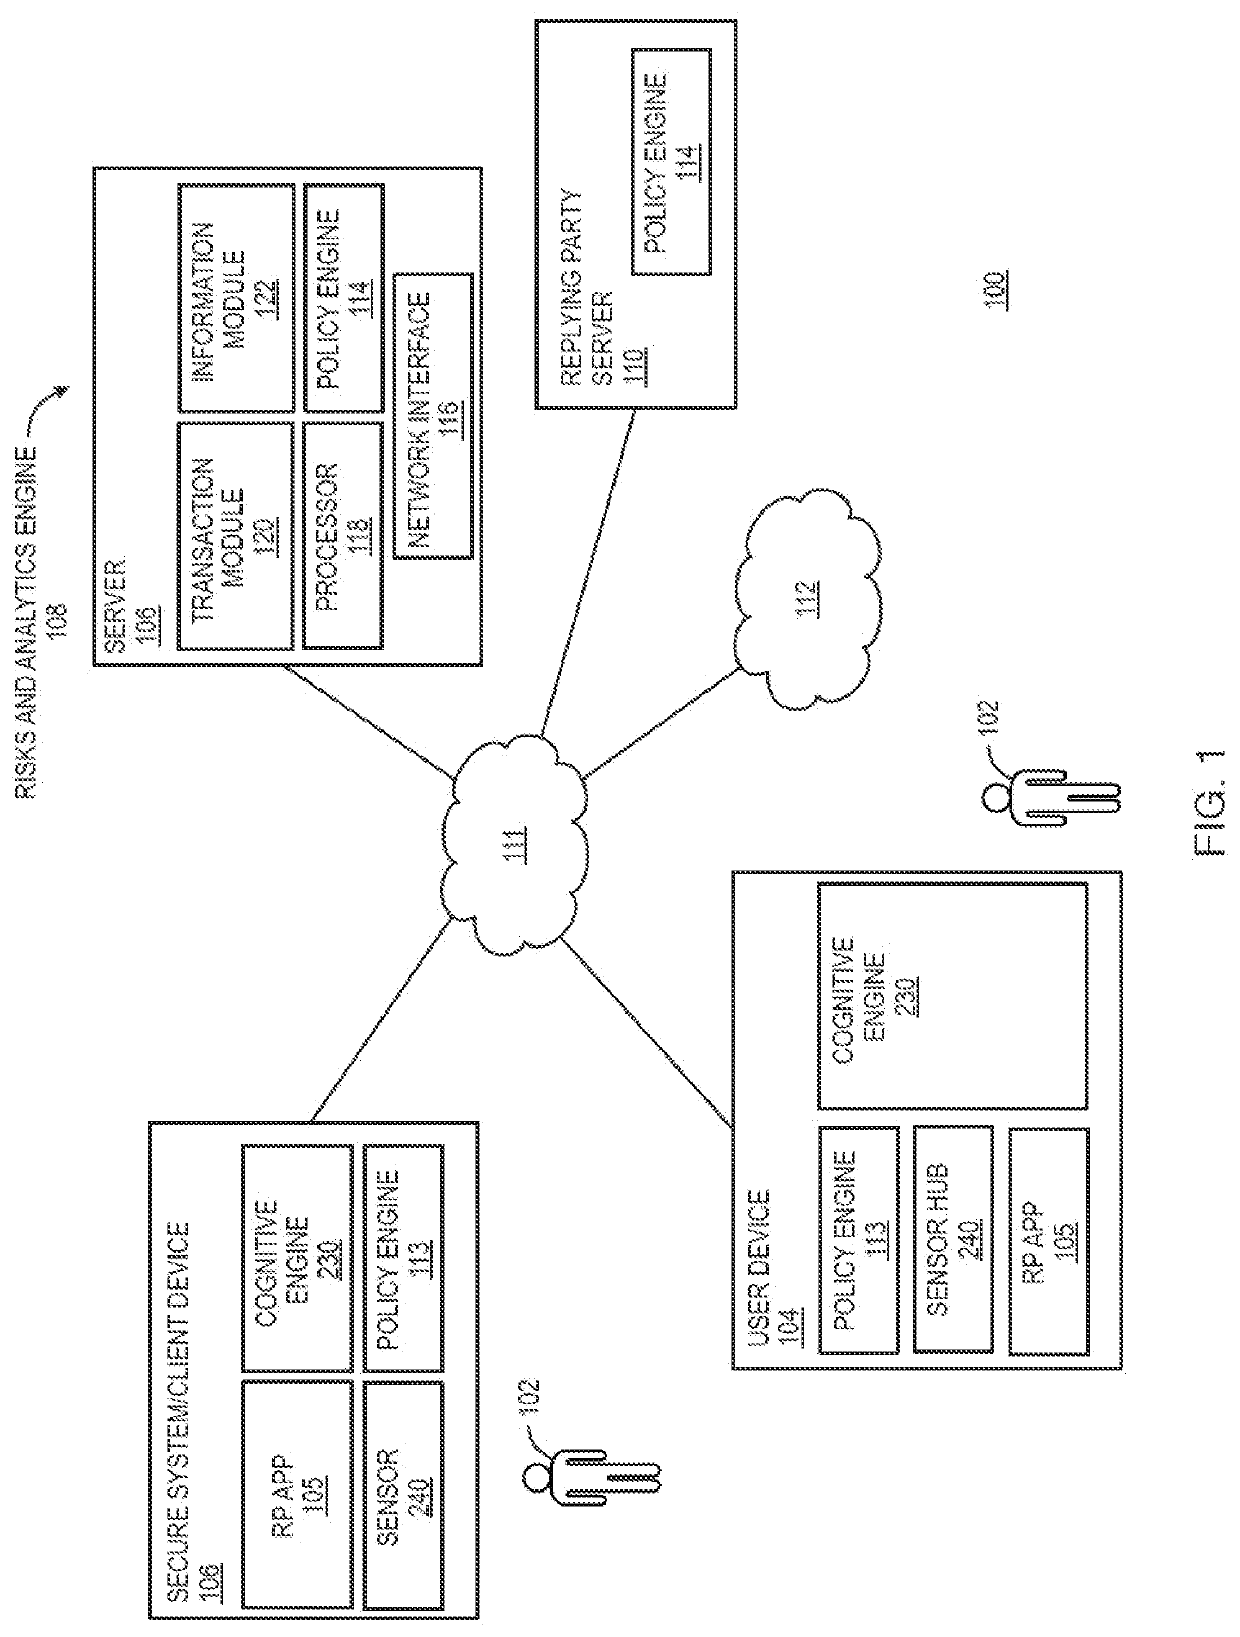 System and method to identify abnormalities to continuously measure transaction risk